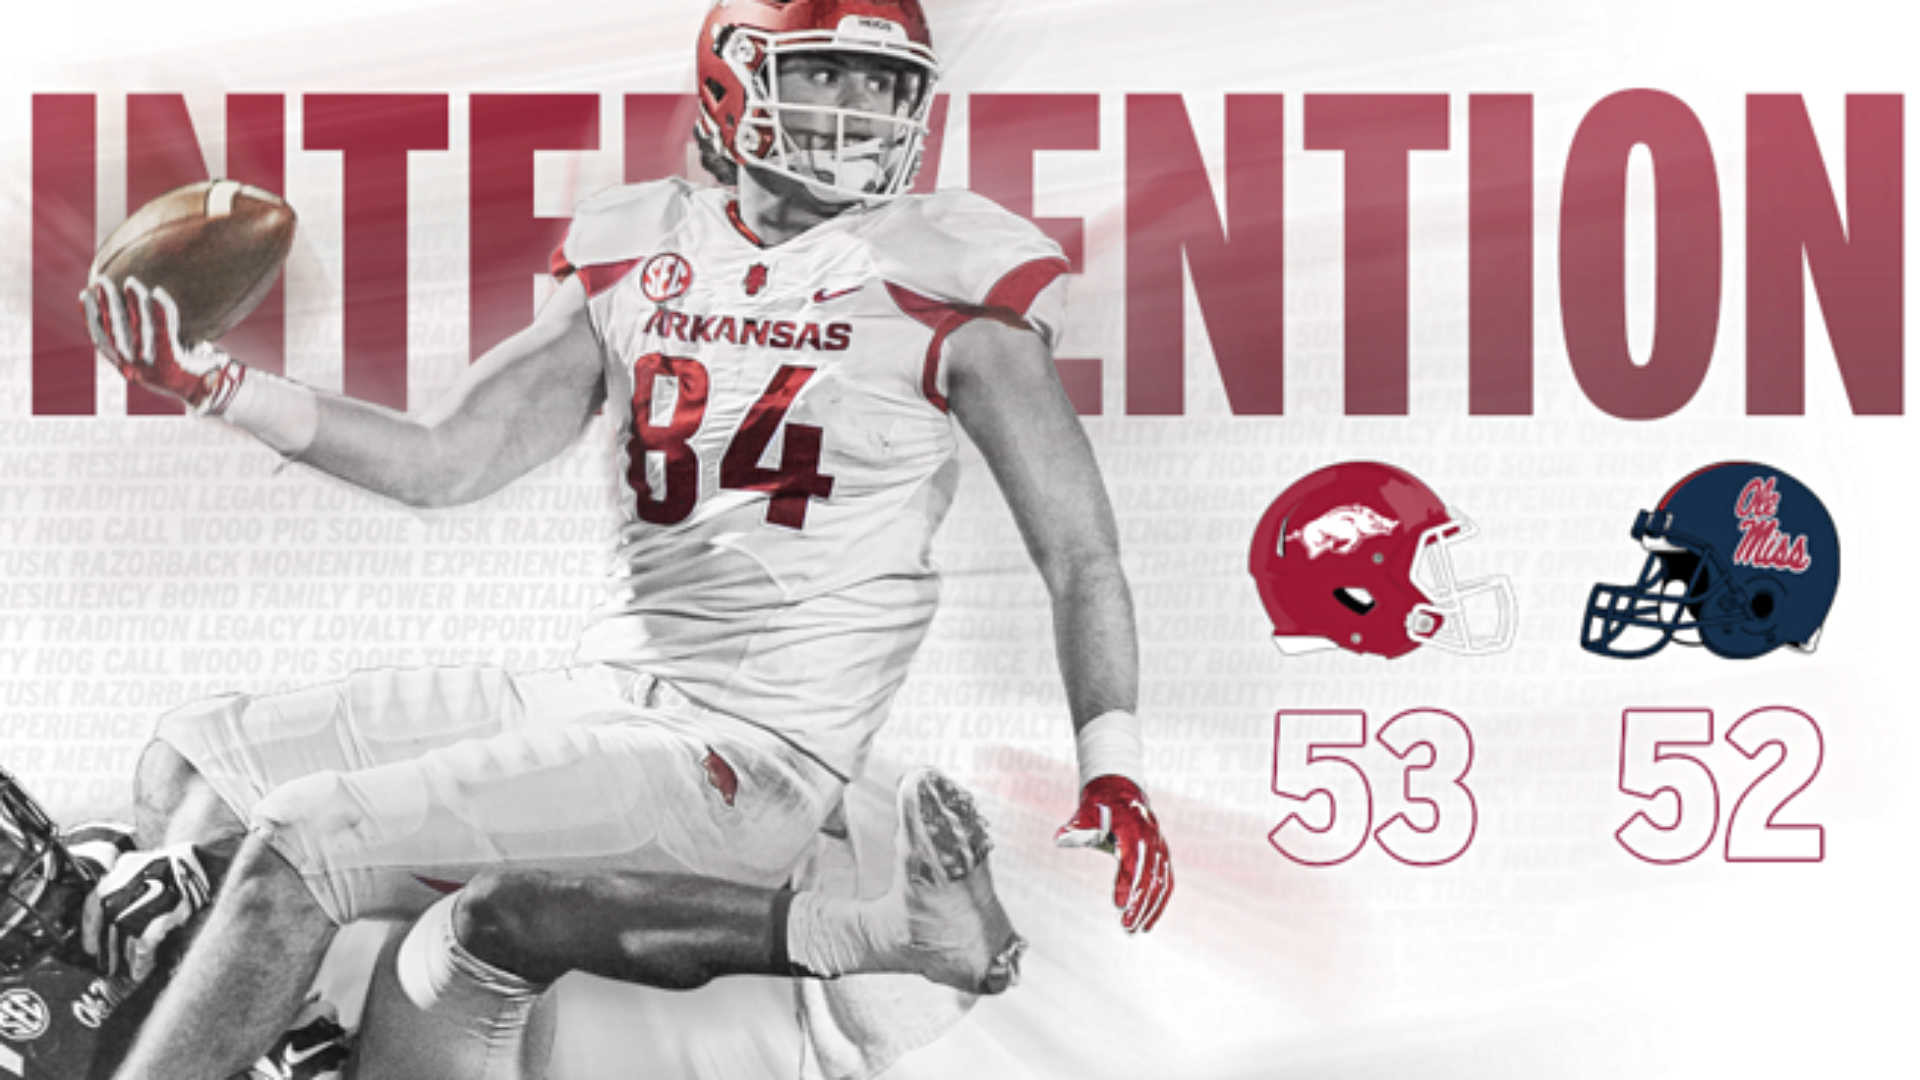 1920x1080 Check out Arkansas' new 'Swine Intervention' cover photo | NCAA Football |  Sporting News